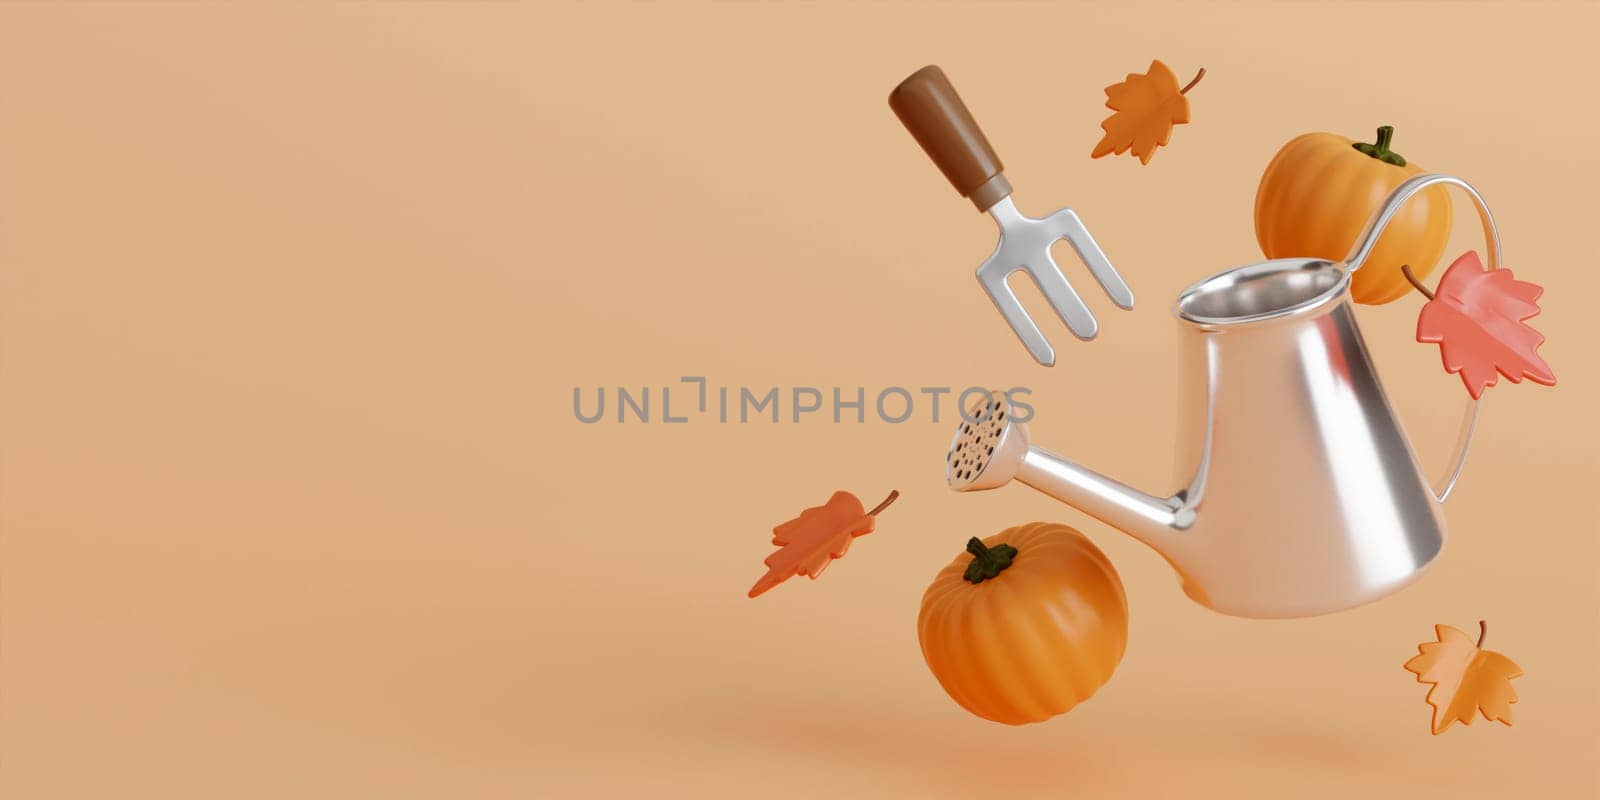 3d Autumn with watering can, leaves, pumpkins, and Shoveling fork background. 3d Fall leaves for the design of Fall banners, posters, advertisements, cards, sales. 3d render illustration. by meepiangraphic